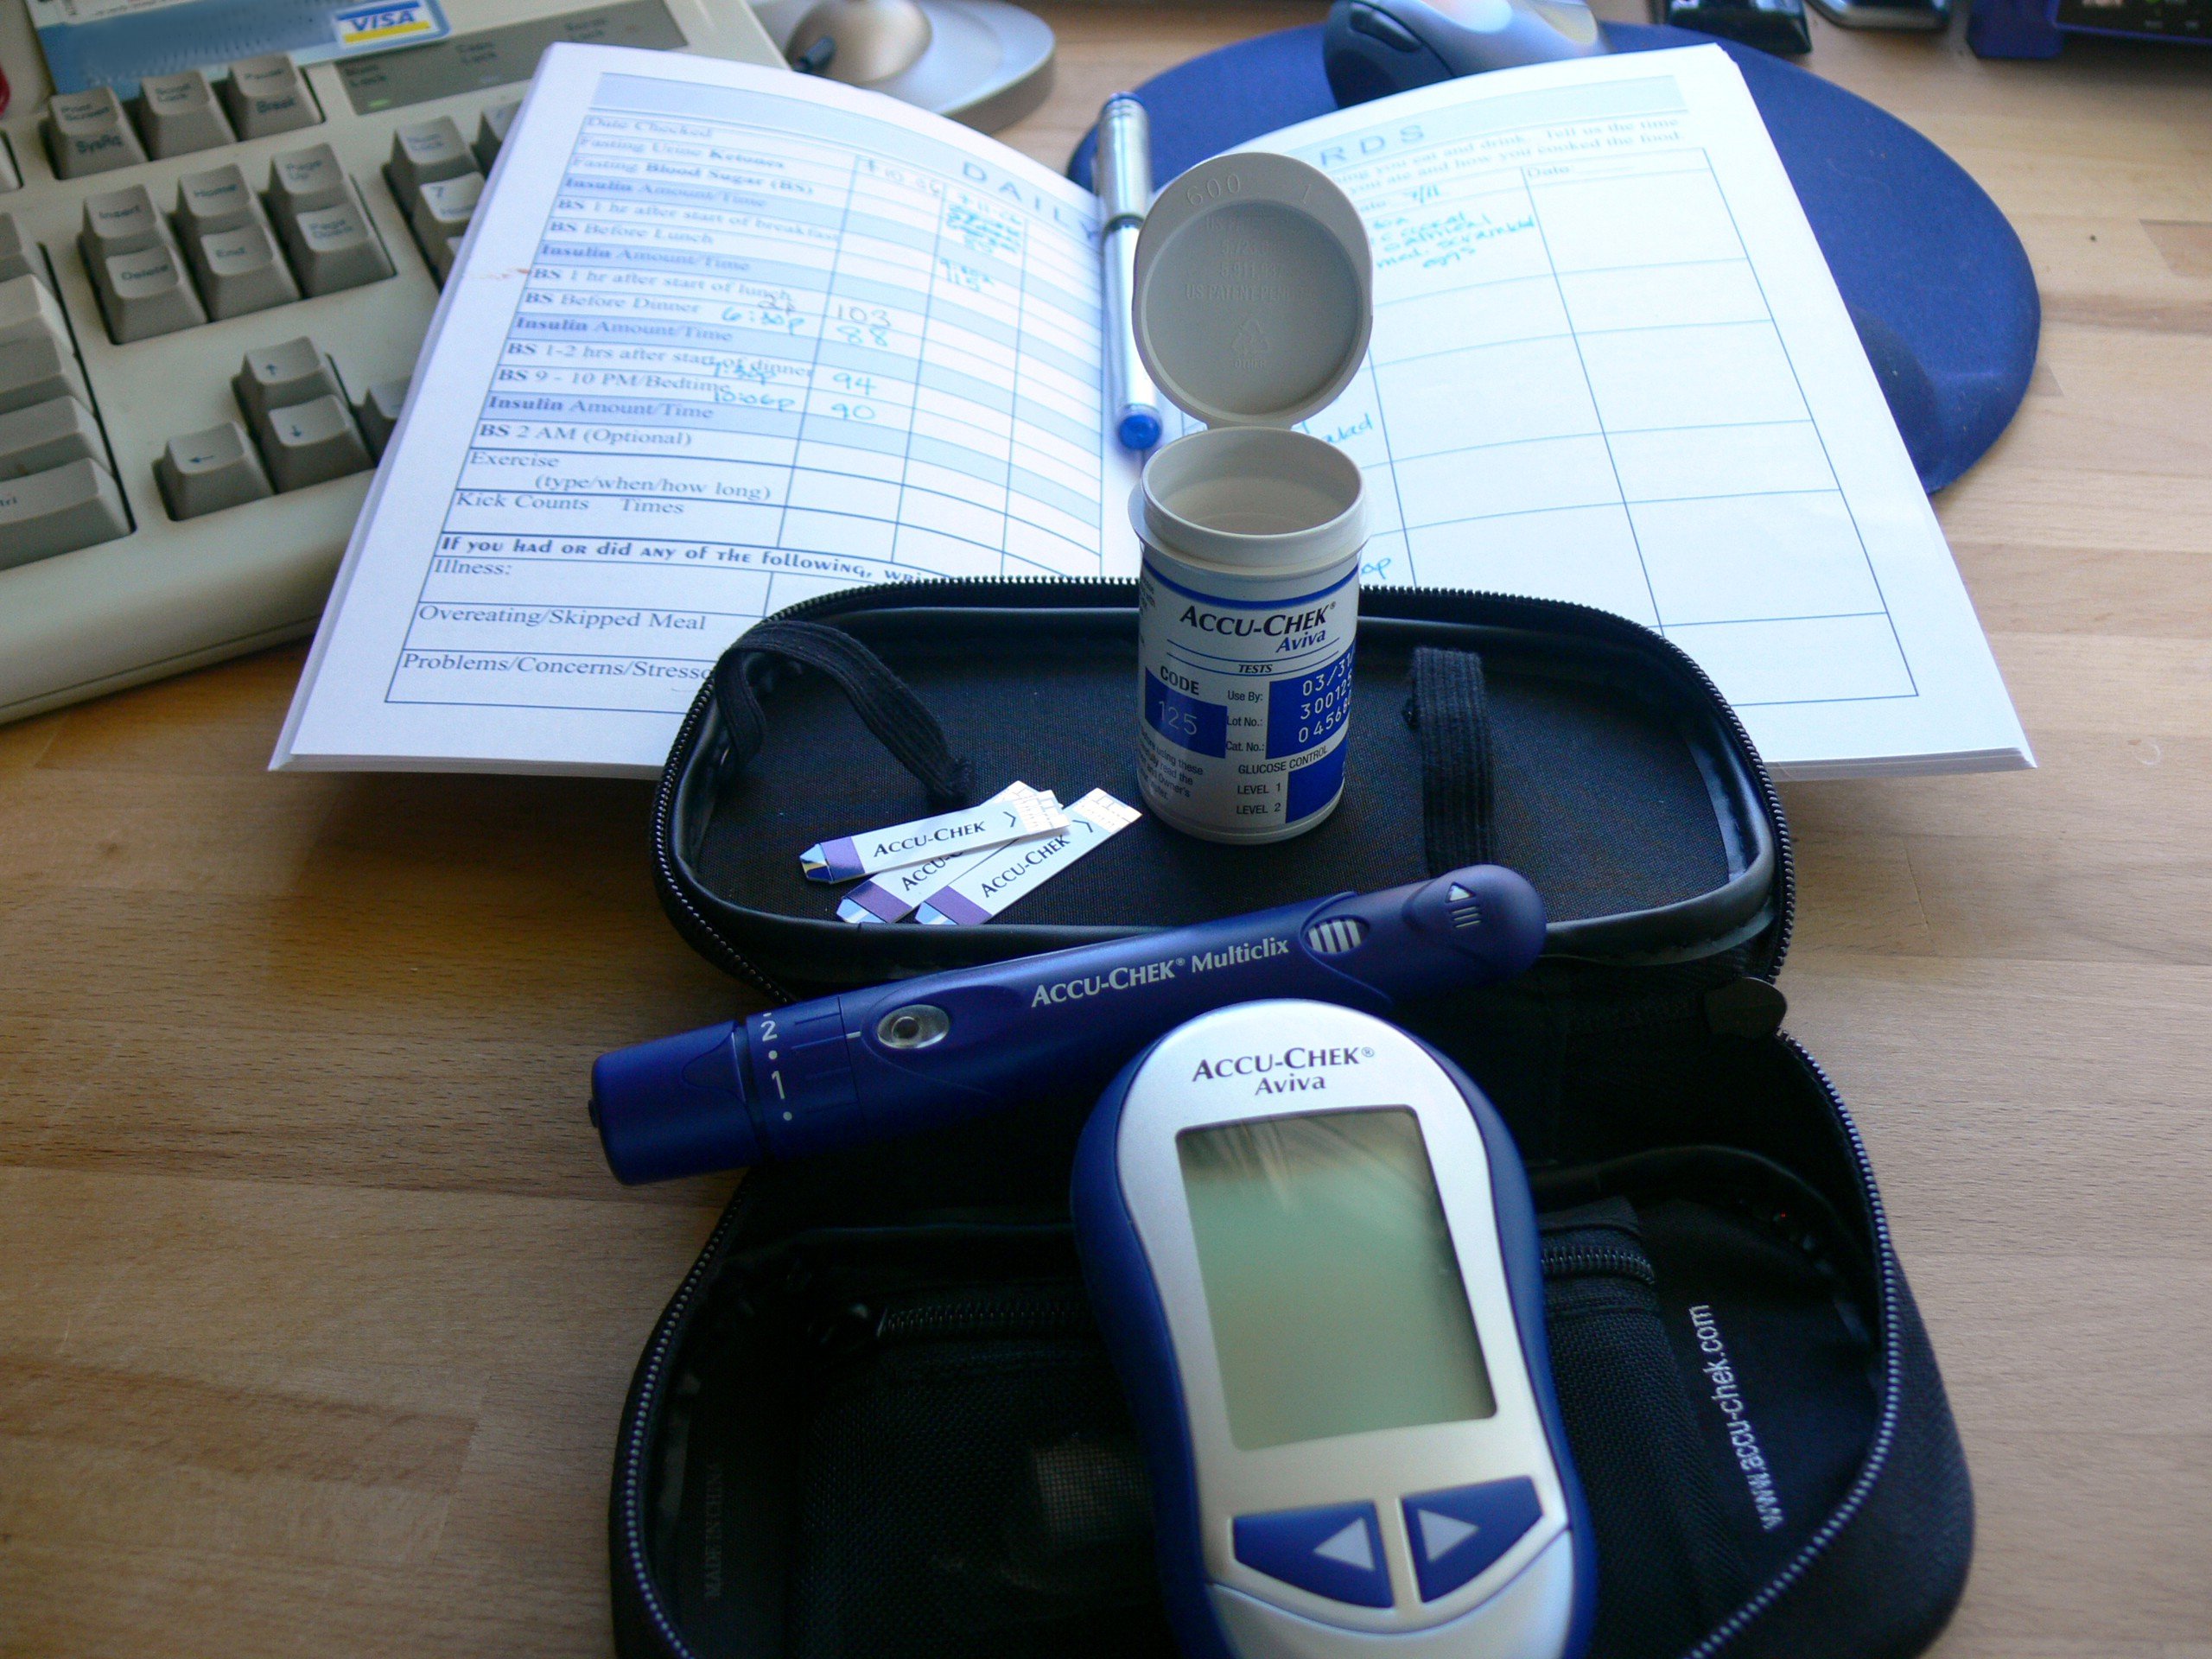 A gestational diabetes kit.^[[Image](https://www.flickr.com/photos/94953676@N00/187457292/) by [Jessica Merz](https://www.flickr.com/photos/jessicafm/) is licensed under [CC BY 2.0](https://creativecommons.org/licenses/by/2.0/)]